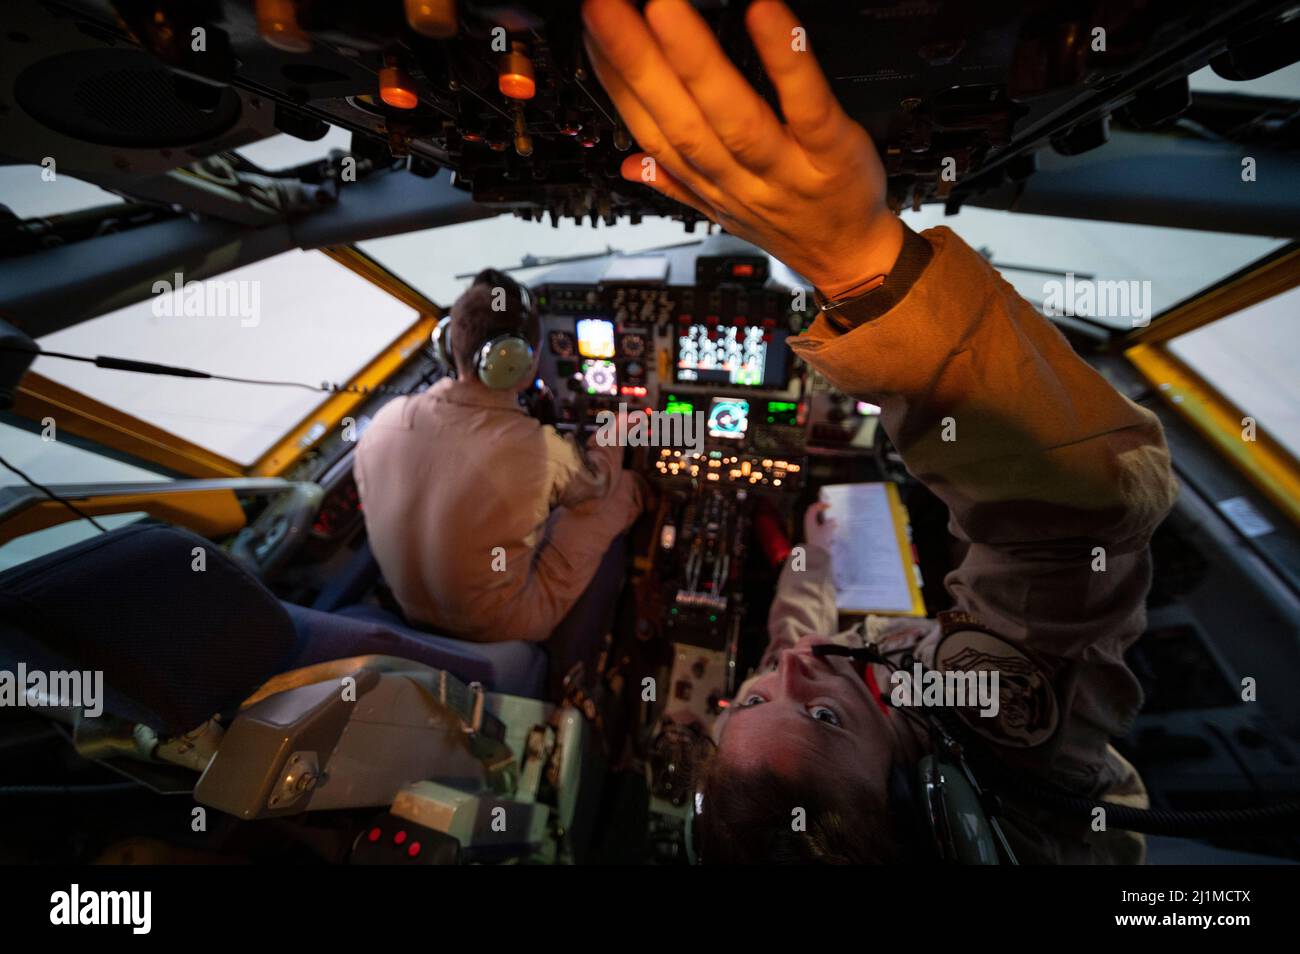 U.S. Air Force Capt. Carl Burnham (left) and 1st Lt. Stephanie Staples (right), U.S. Air Force KC-135 Stratotanker pilots assigned to the 340th Expeditionary Air Refueling Squadron, conduct pre-flight checks at Al Udeid Air Base, Qatar, March 12, 2022. The 340th EARS, deployed with with Ninth Air Force (Air Forces Central), is responsible for delivering fuel to U.S. and coalition forces, enabling war-winning air power, deterrence and stability to the region. (U.S. Air Force photo by Tech. Sgt. Christopher Ruano) Stock Photo